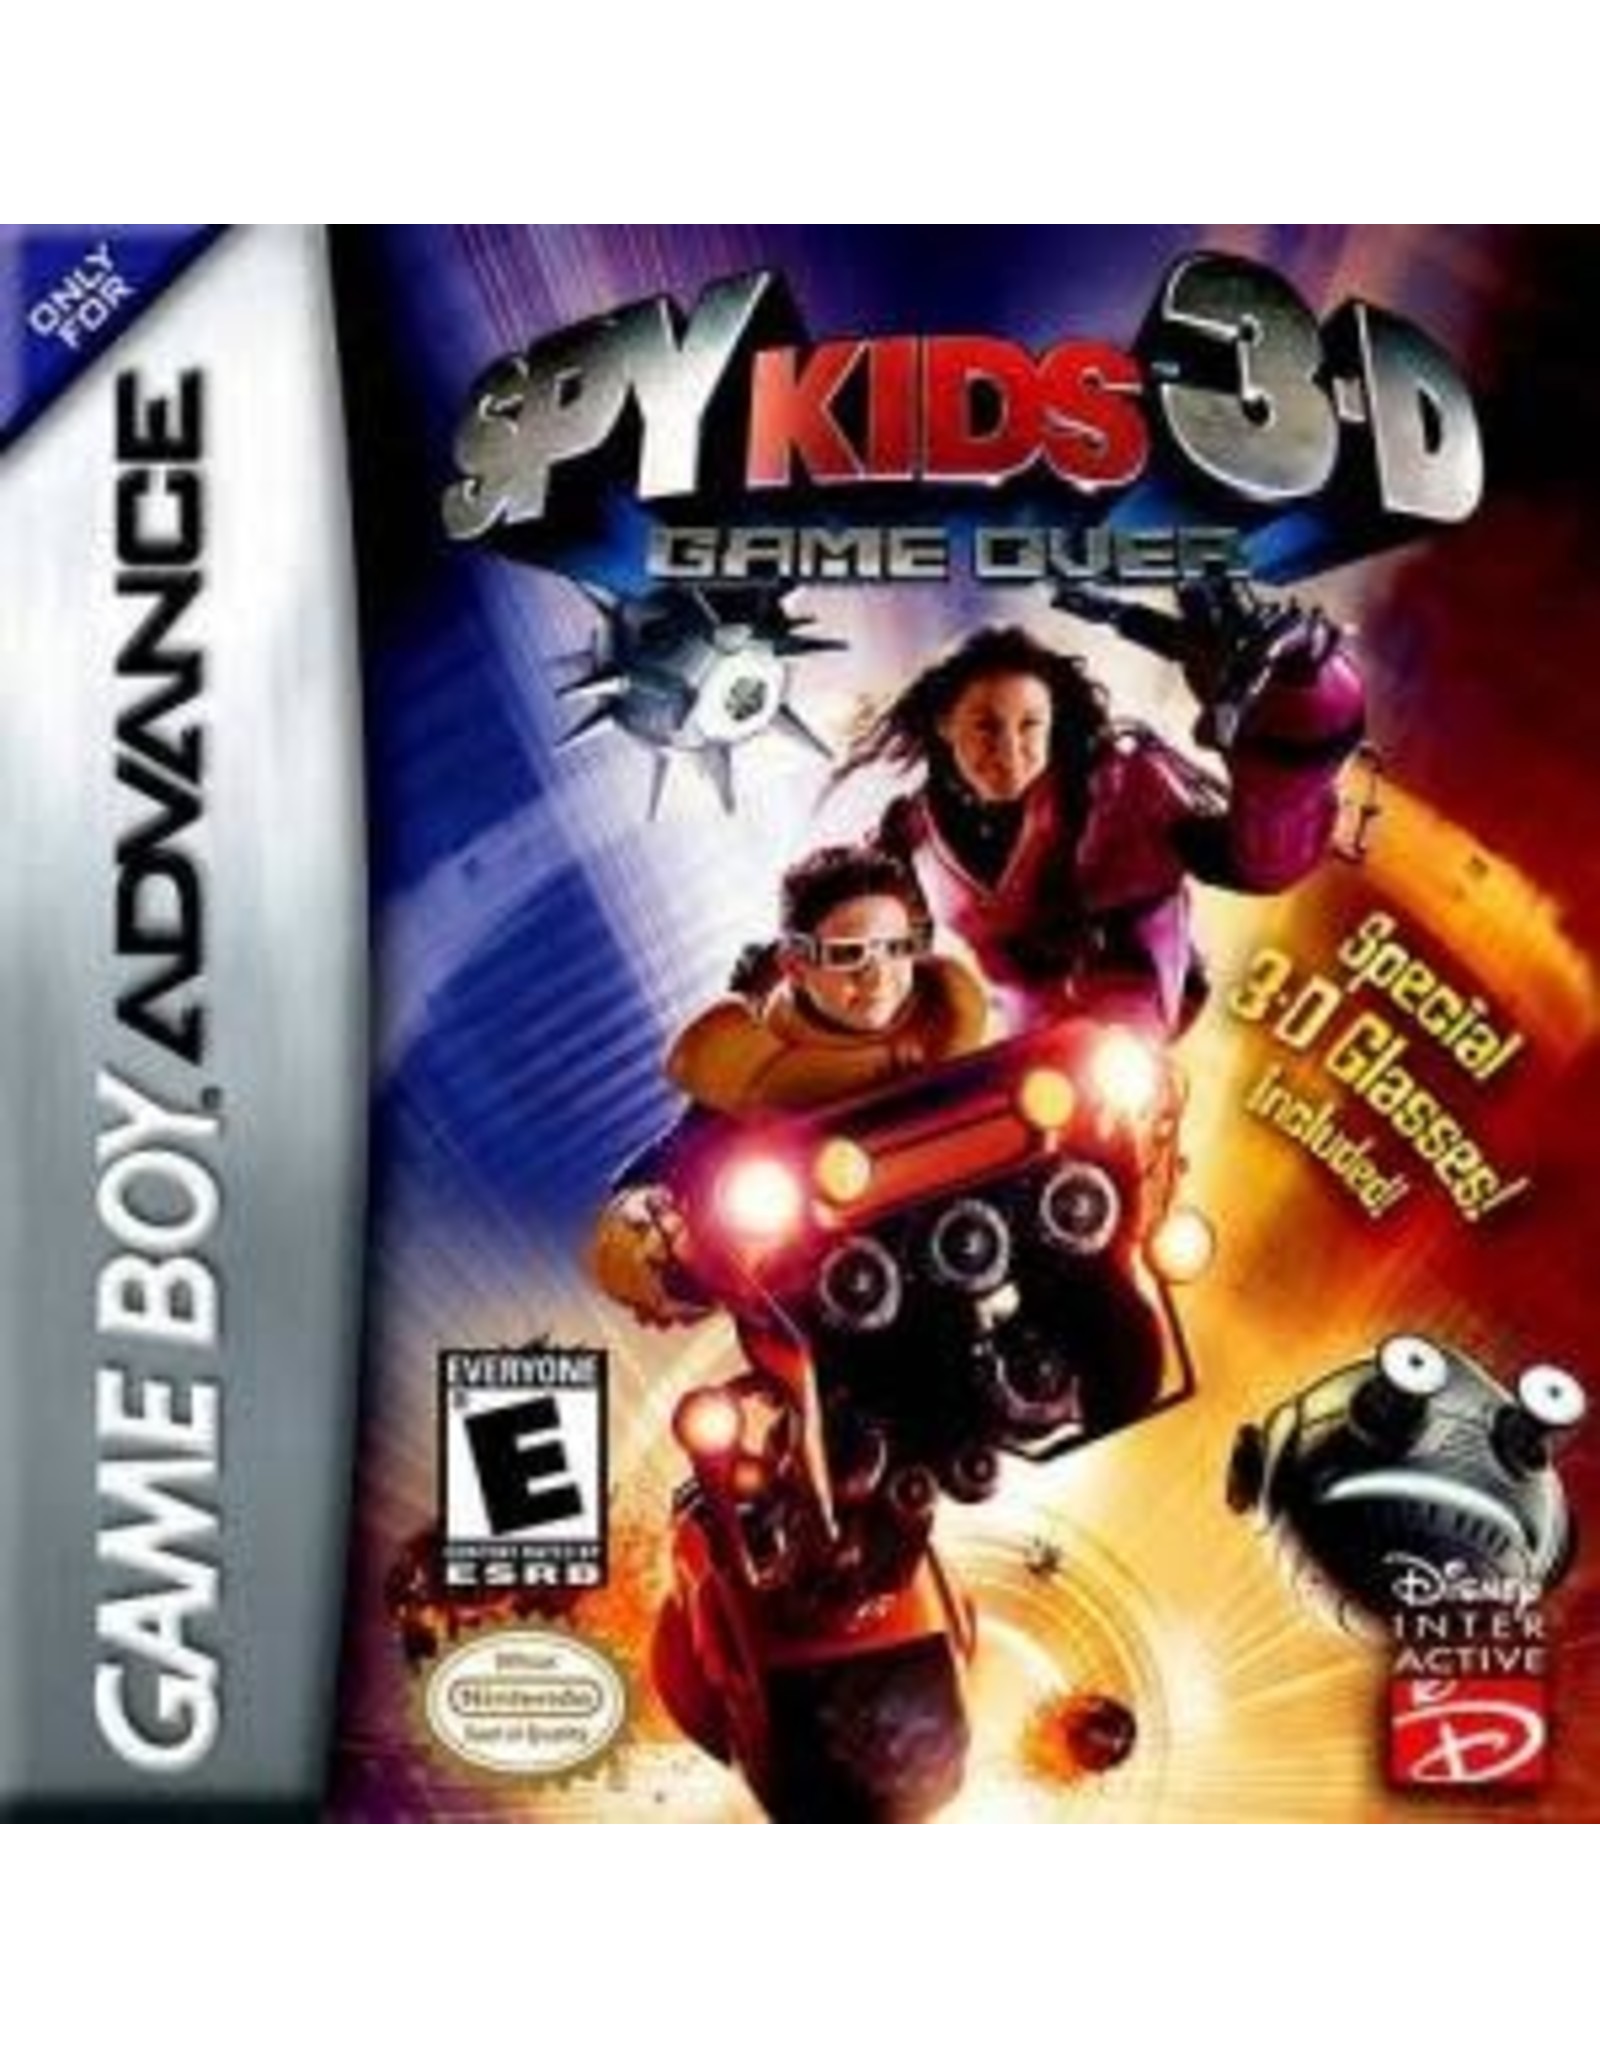 Game Boy Advance Spy Kids 3D Game Over (Cart Only)